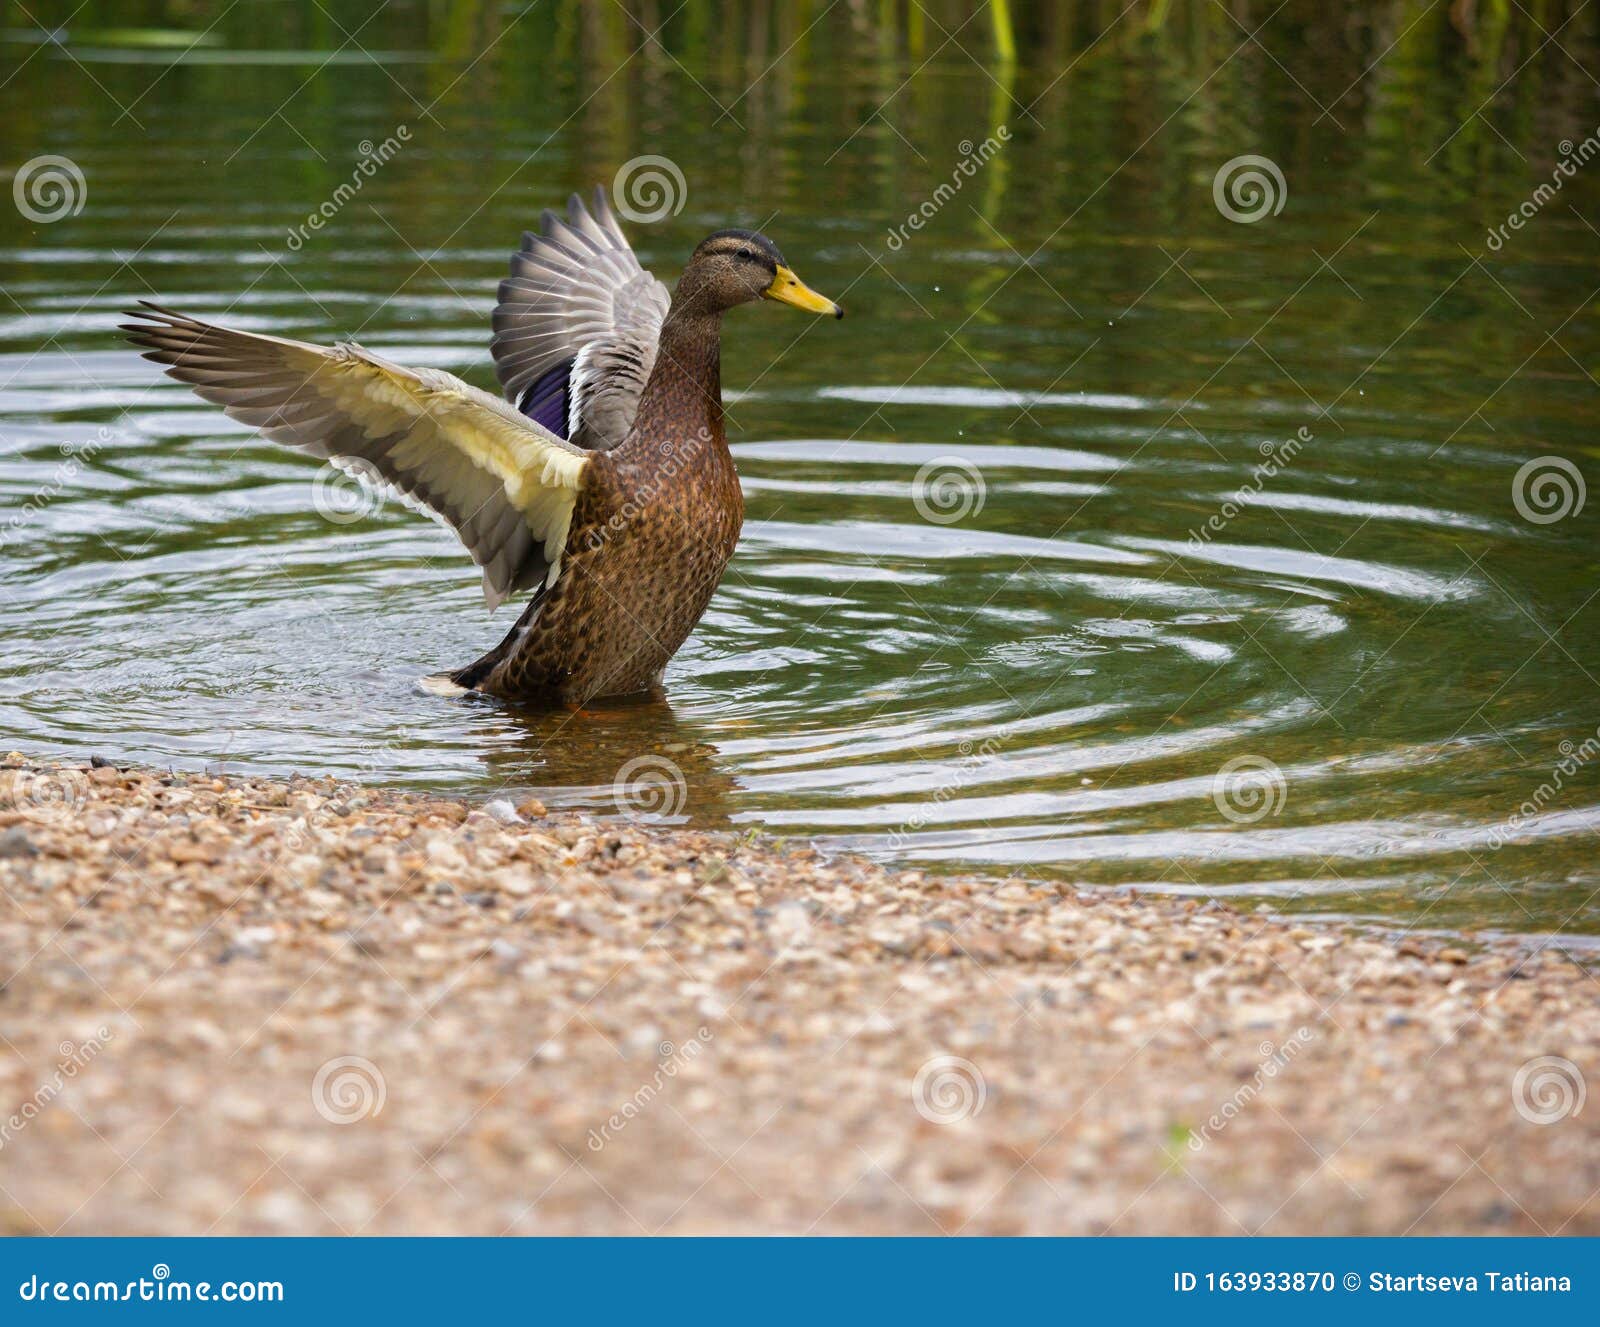 Mallard Duck With Open Wings On A Pond Near The Shore ...